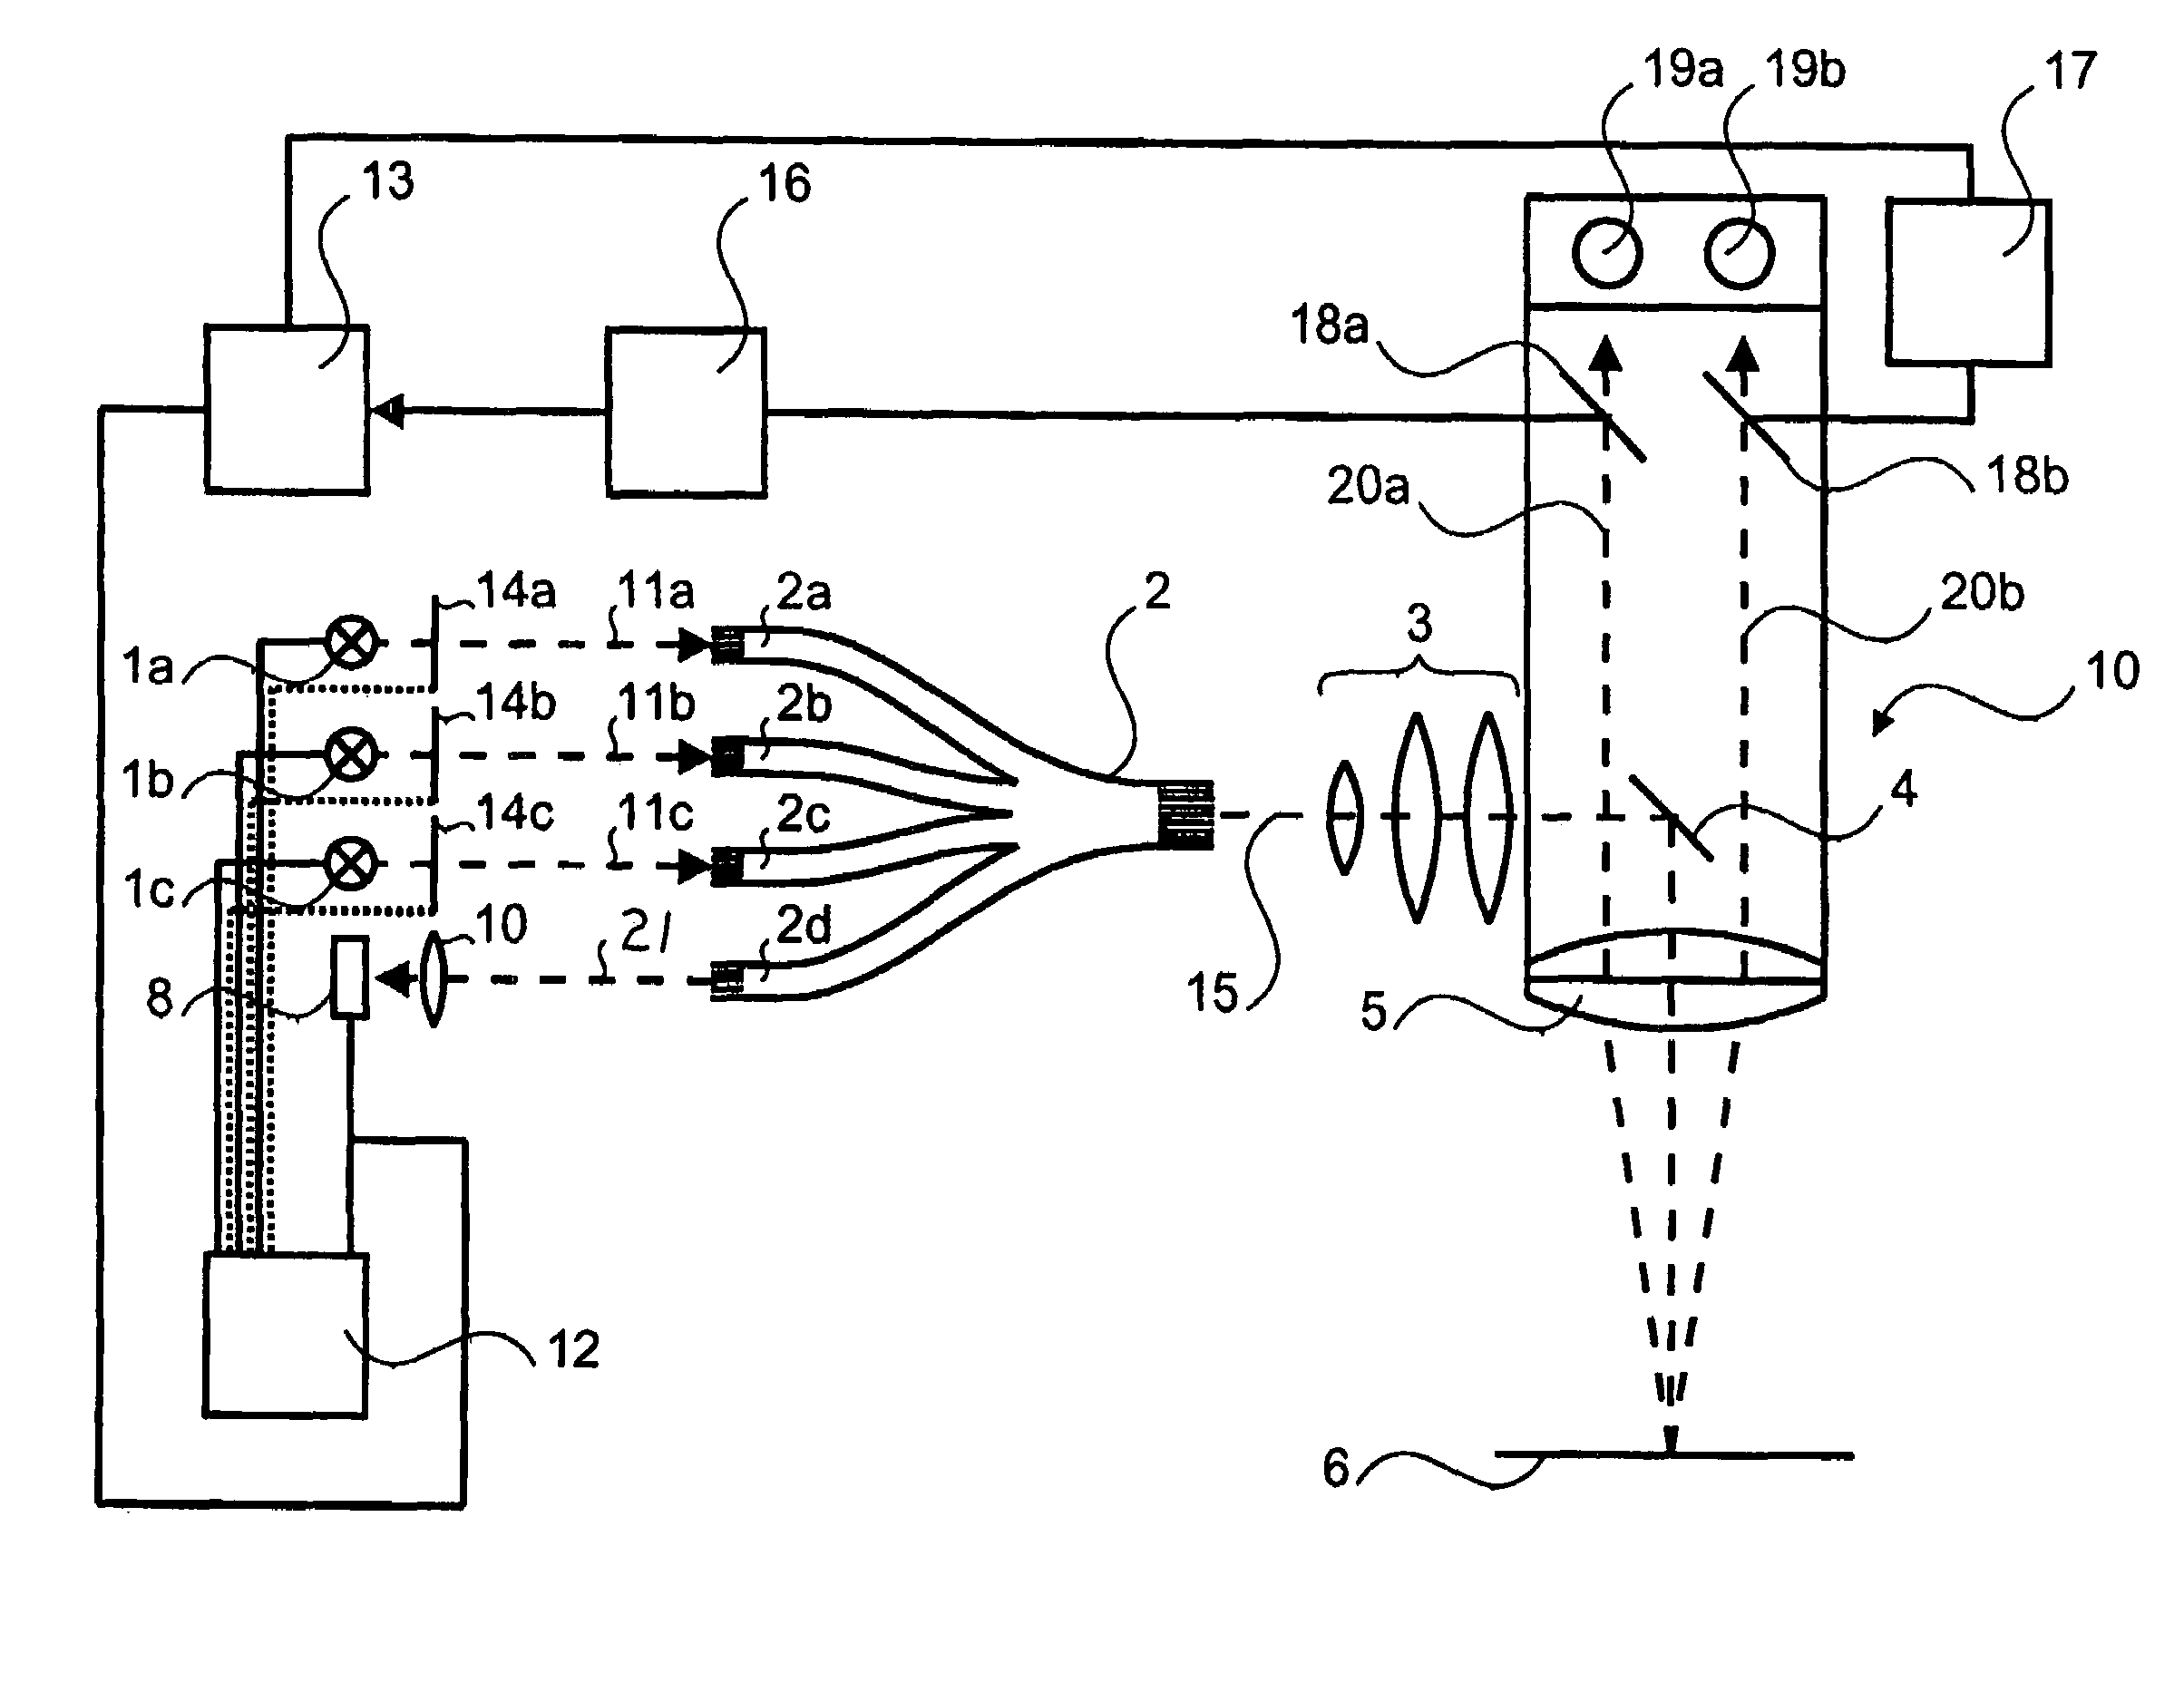 Light-emitting diode illumination system for an optical observation device, in particular a stereomicroscope or stereo surgical microscope